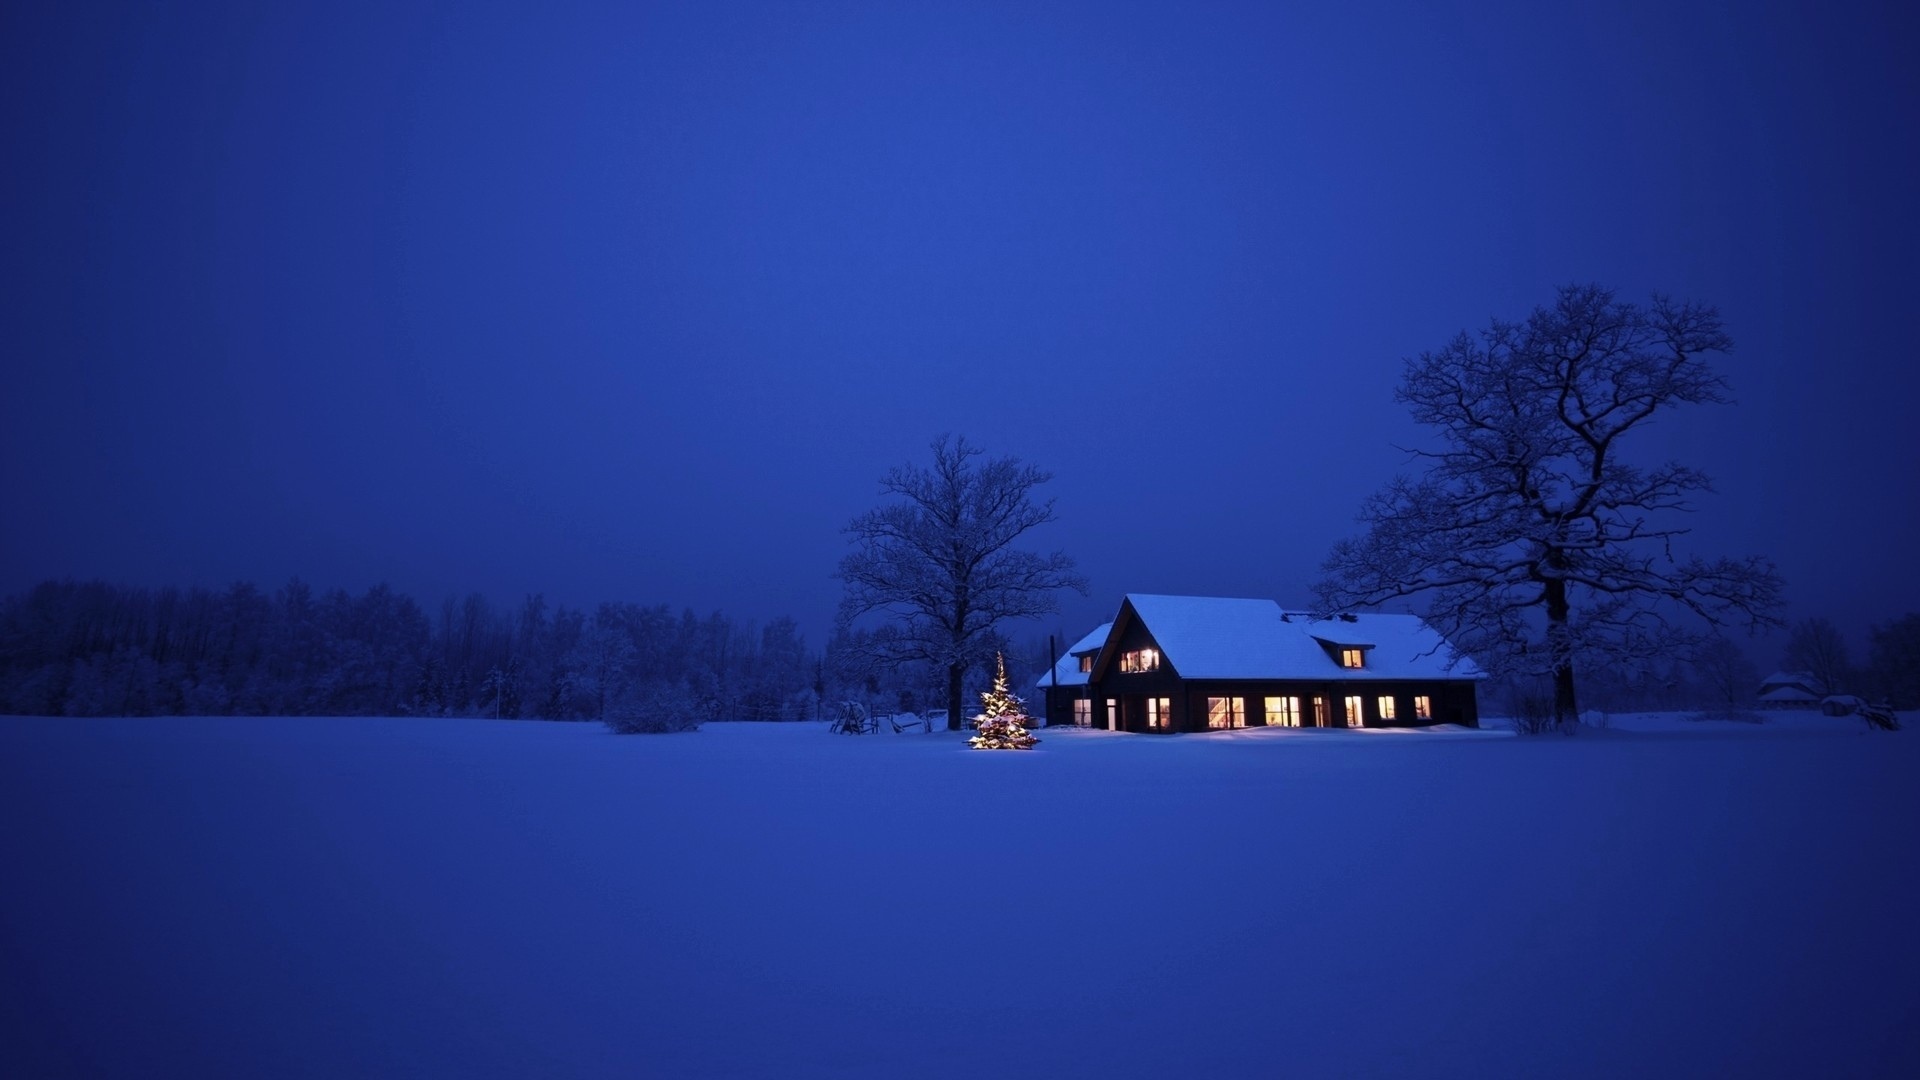 snow, christmas xmas, houses, new year, landscape, holidays, winter, blue cellphone